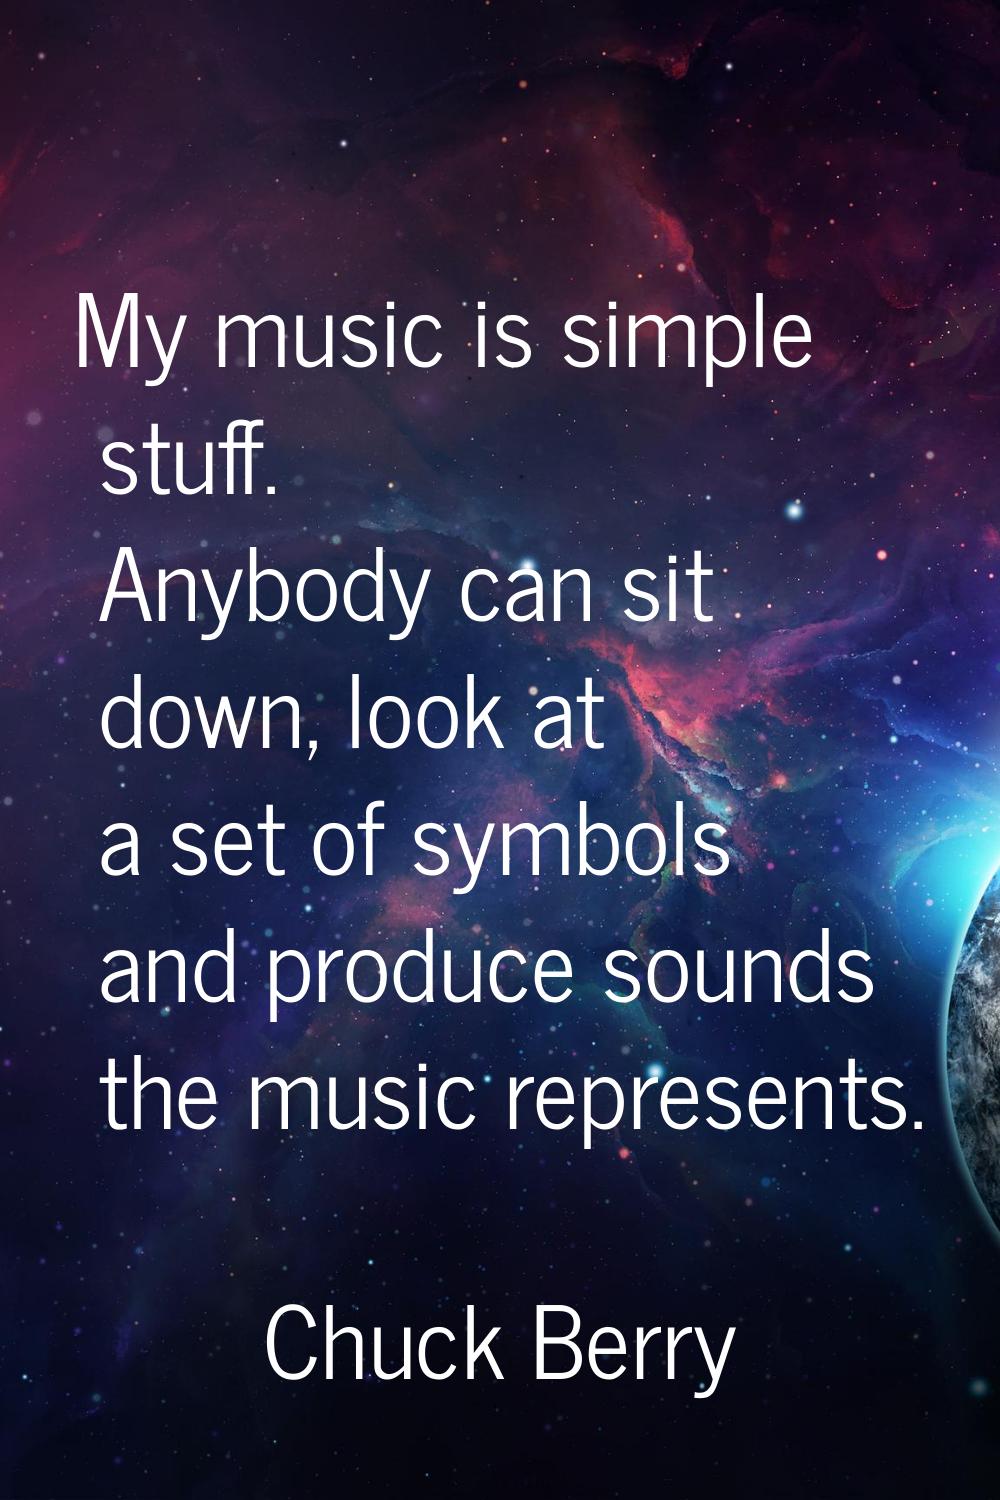 My music is simple stuff. Anybody can sit down, look at a set of symbols and produce sounds the mus